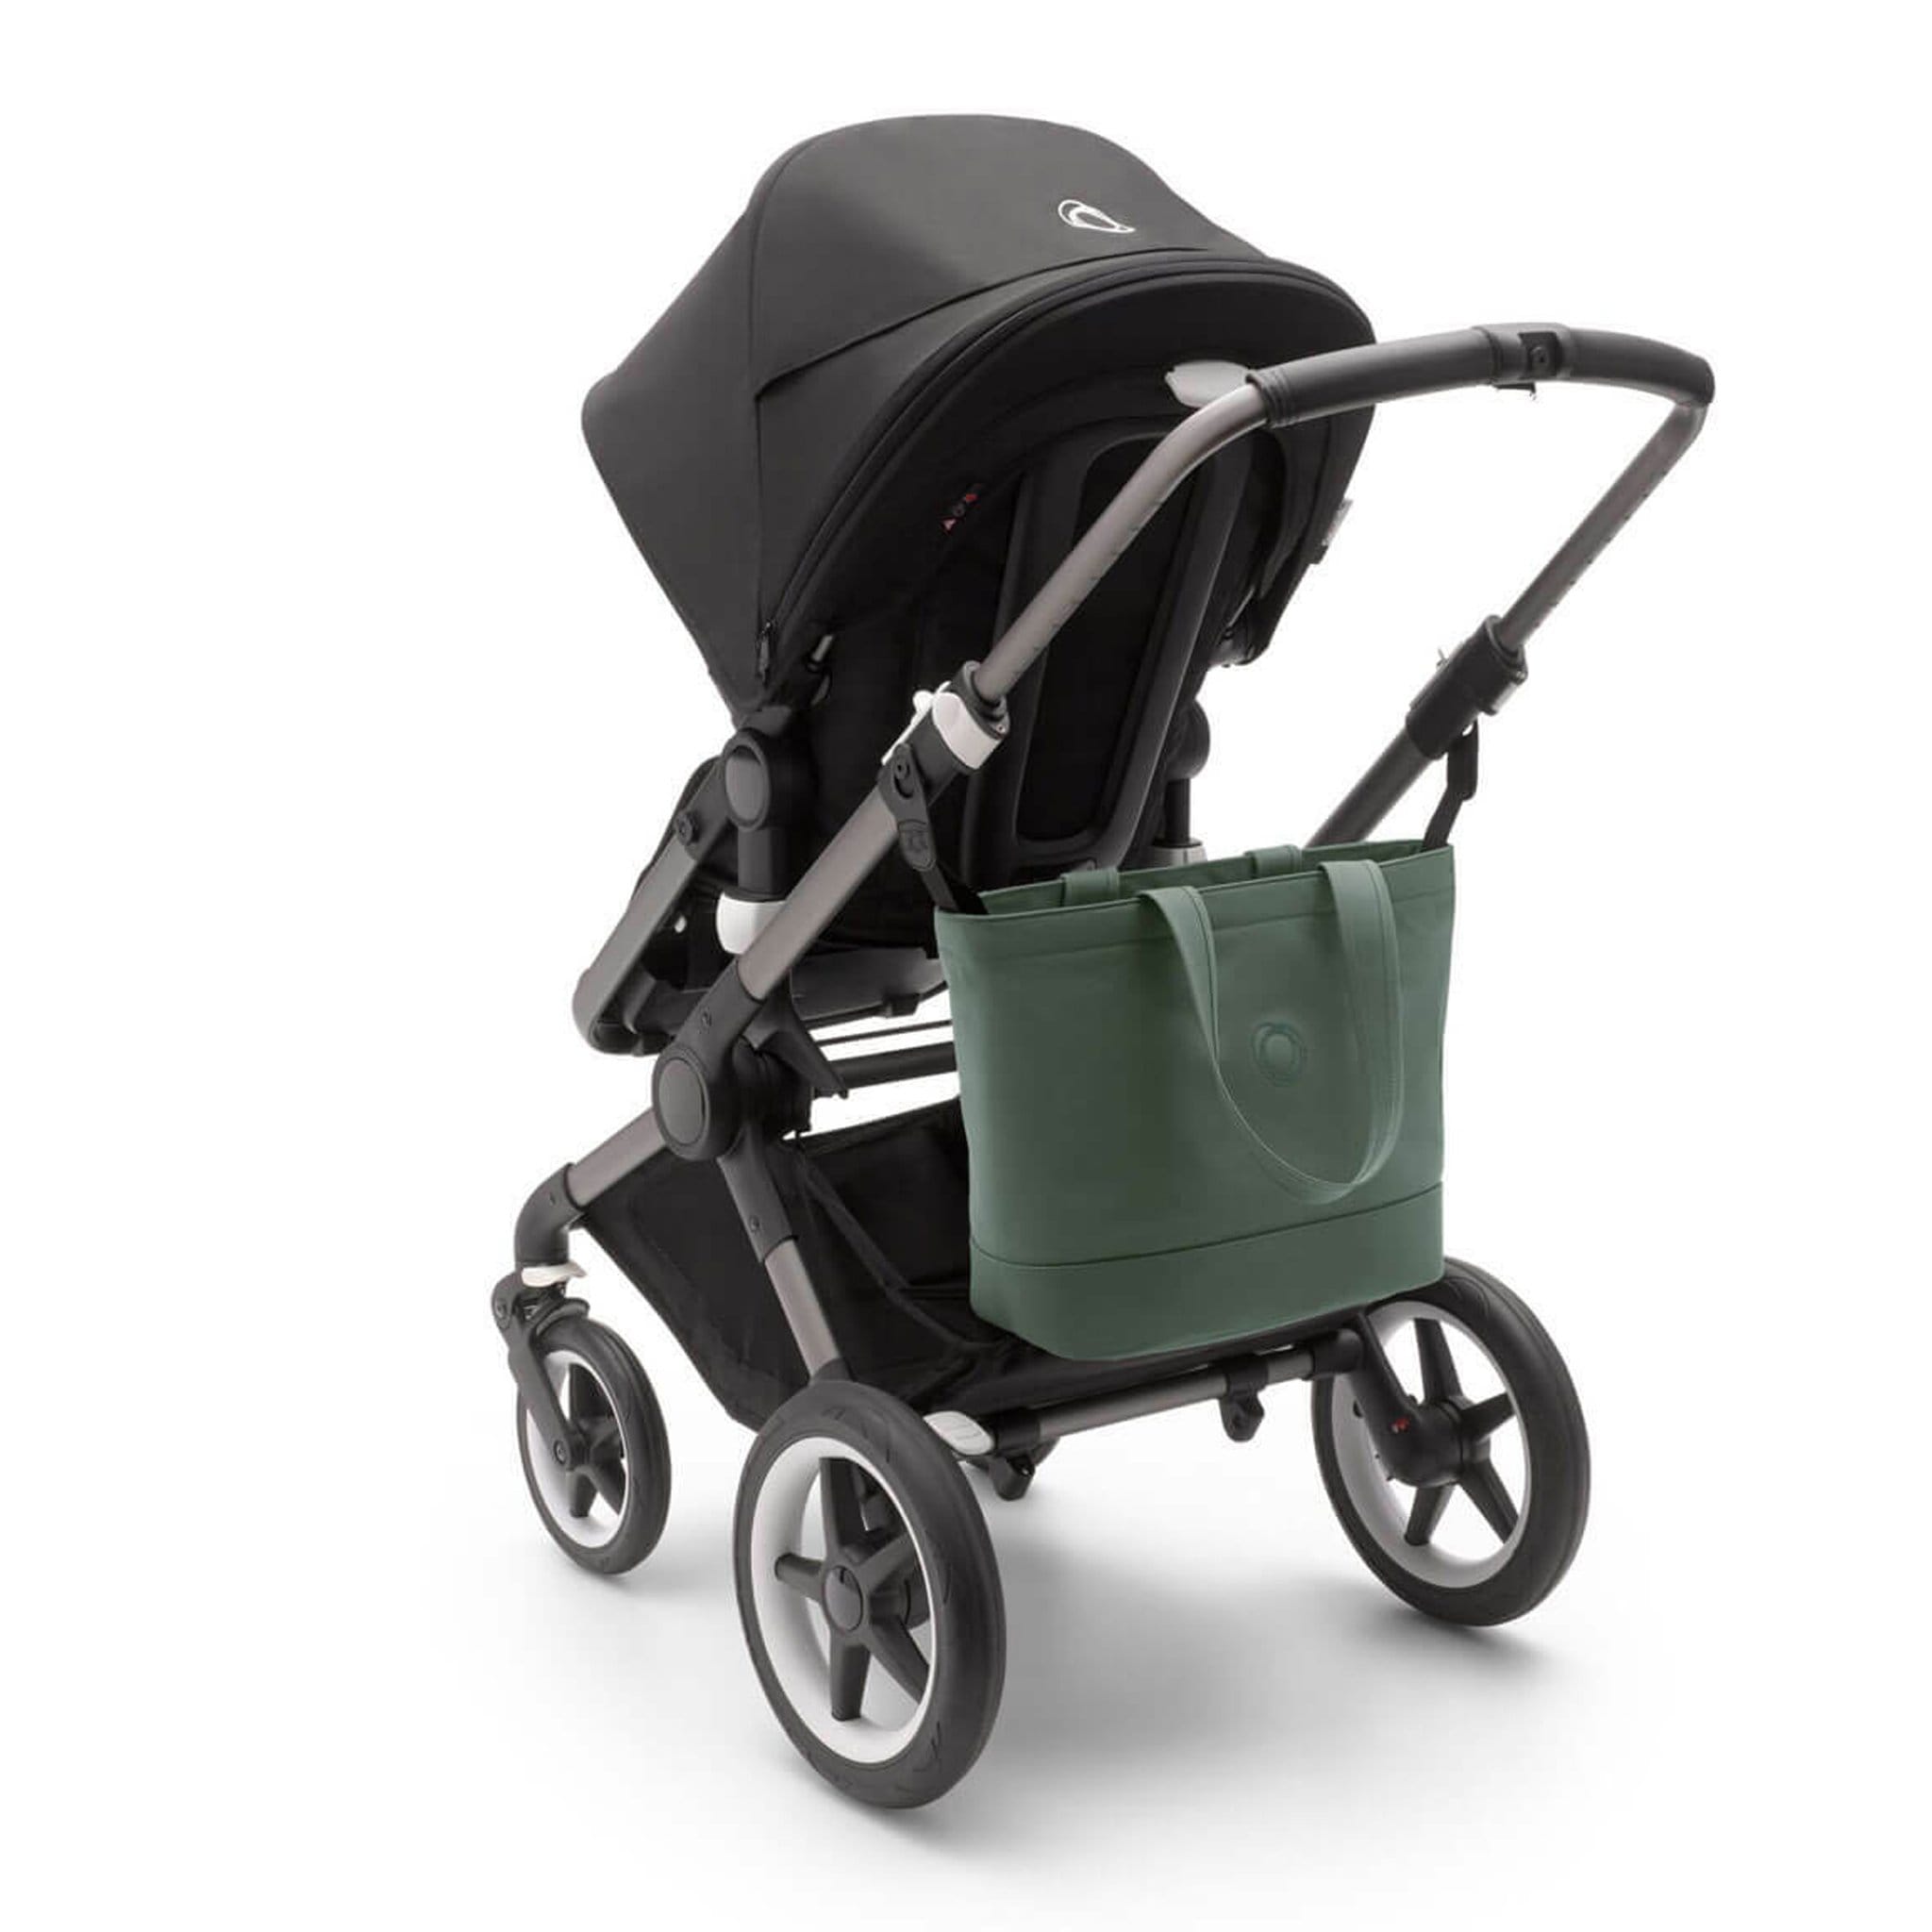 Bugaboo changing bags Bugaboo Changing Bag in Forest Green 2306010083